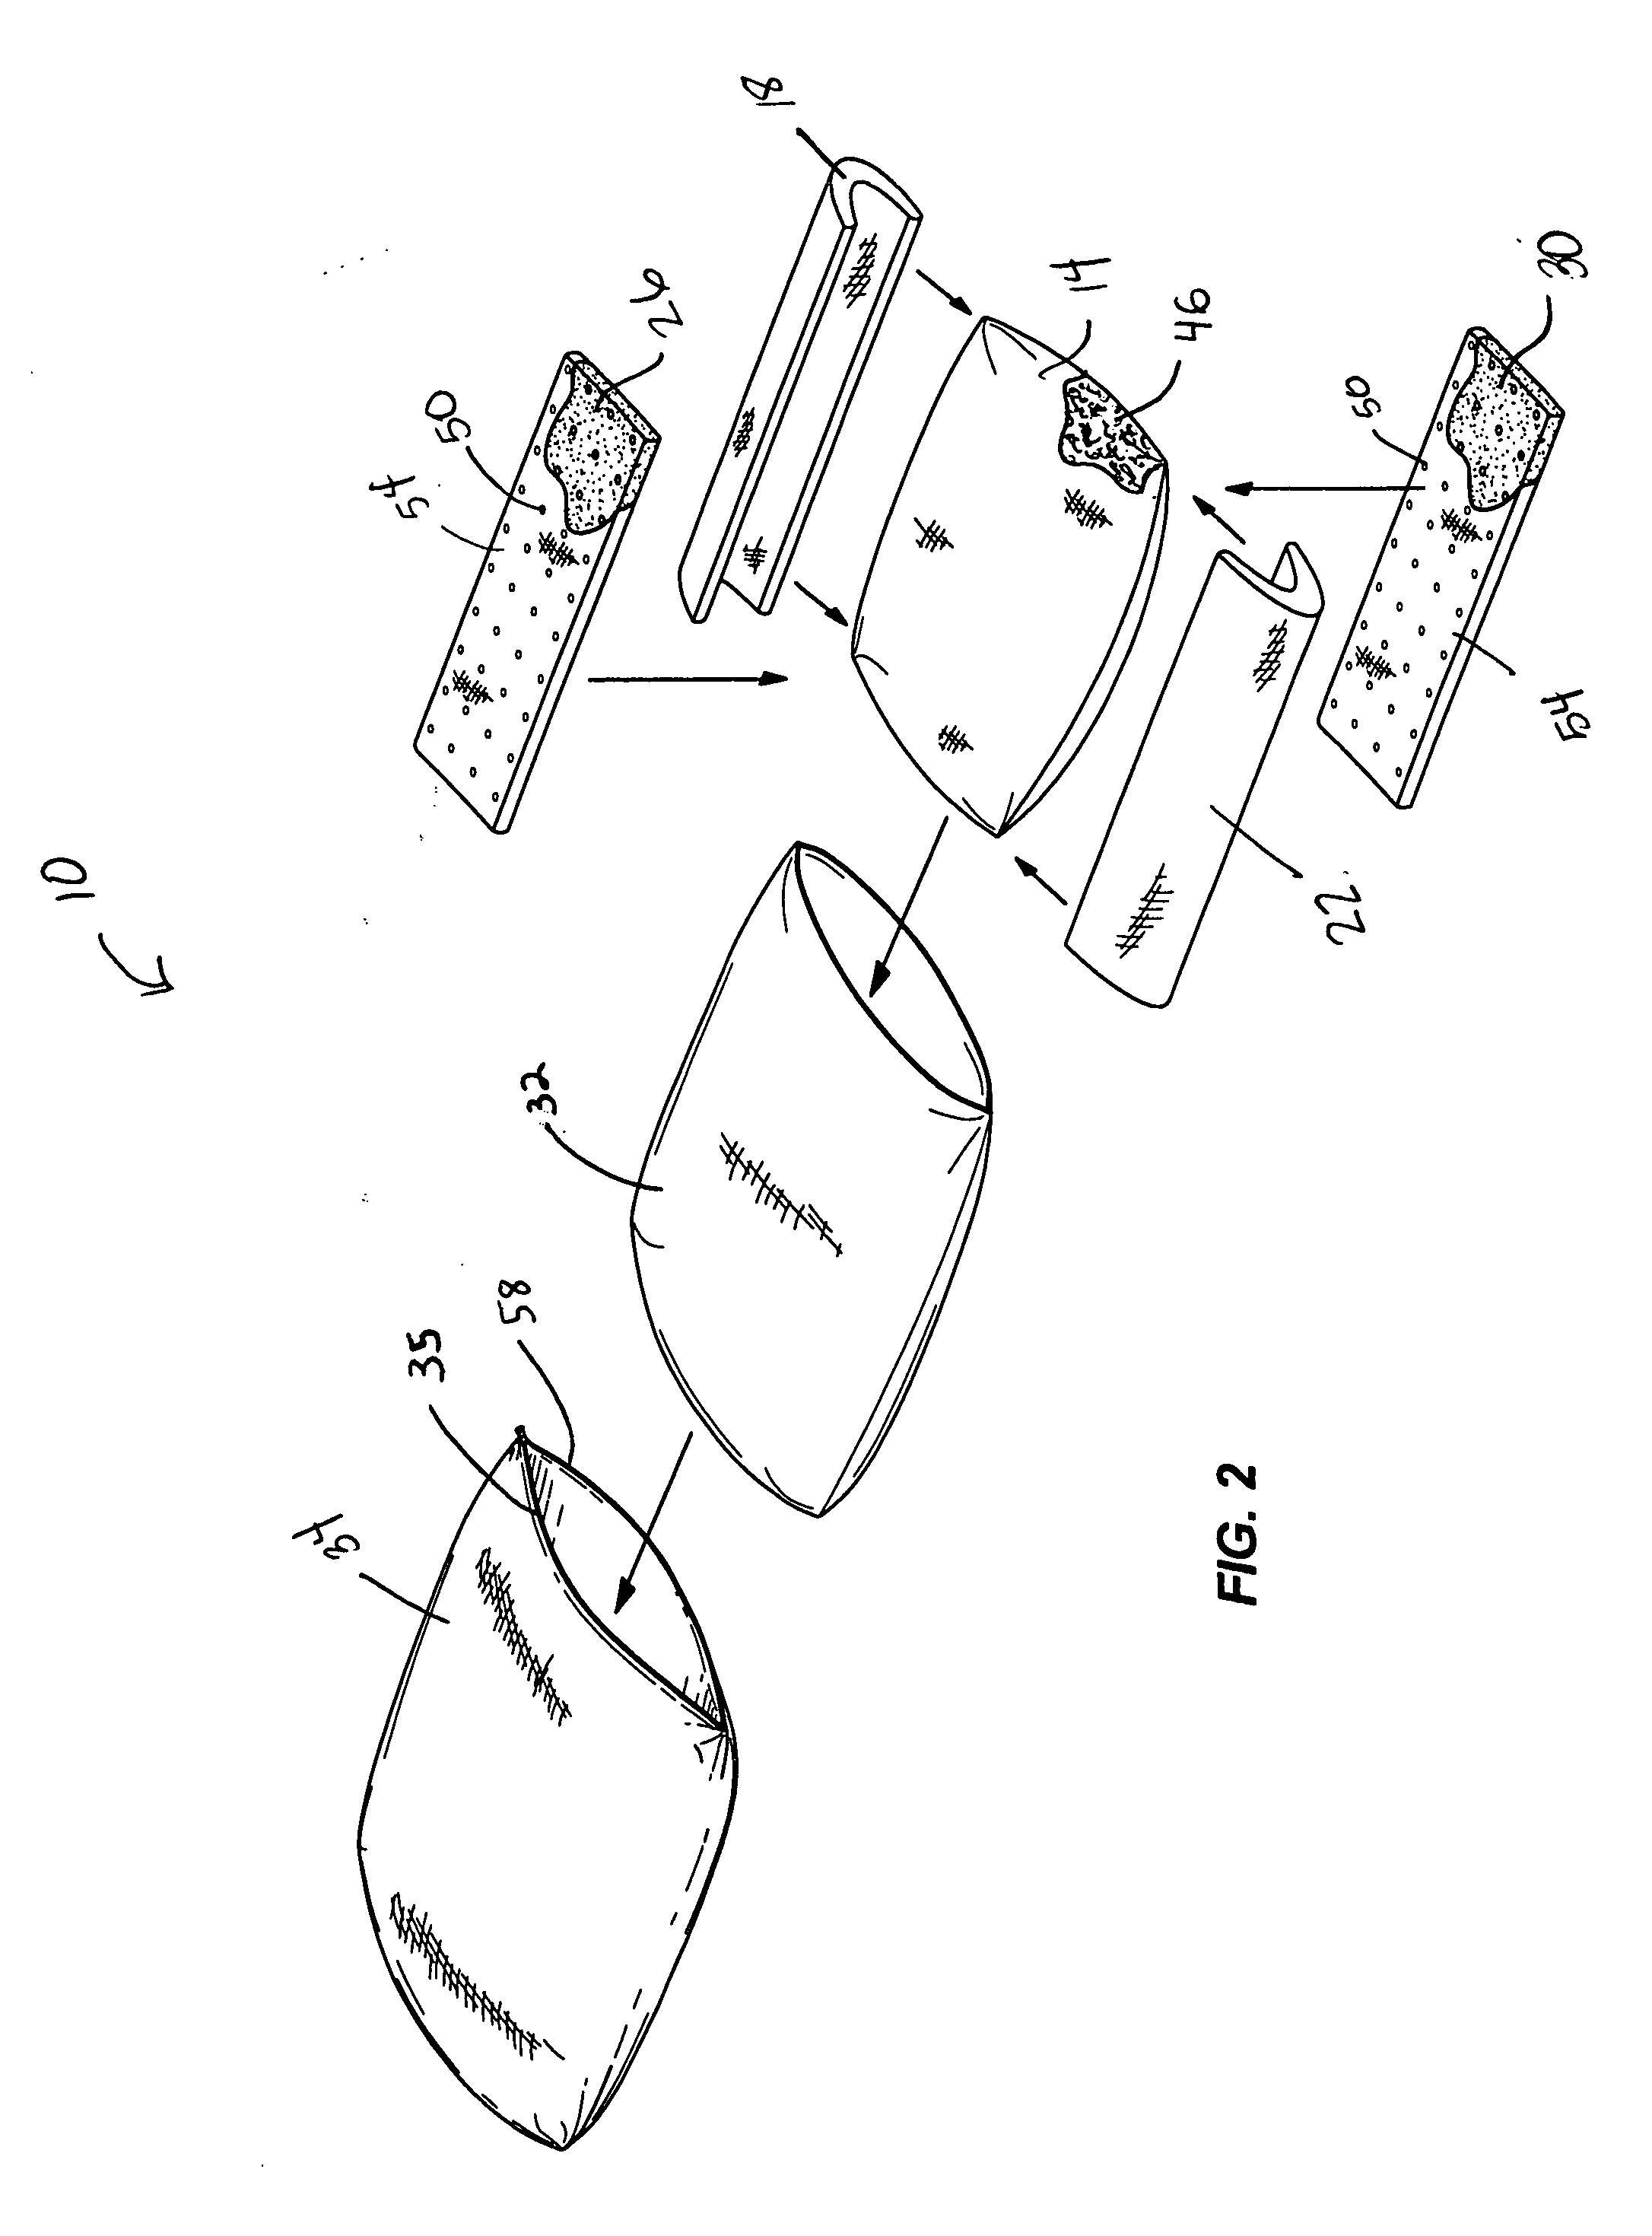 Multi-component pillow and method of manufacturing and assembling same